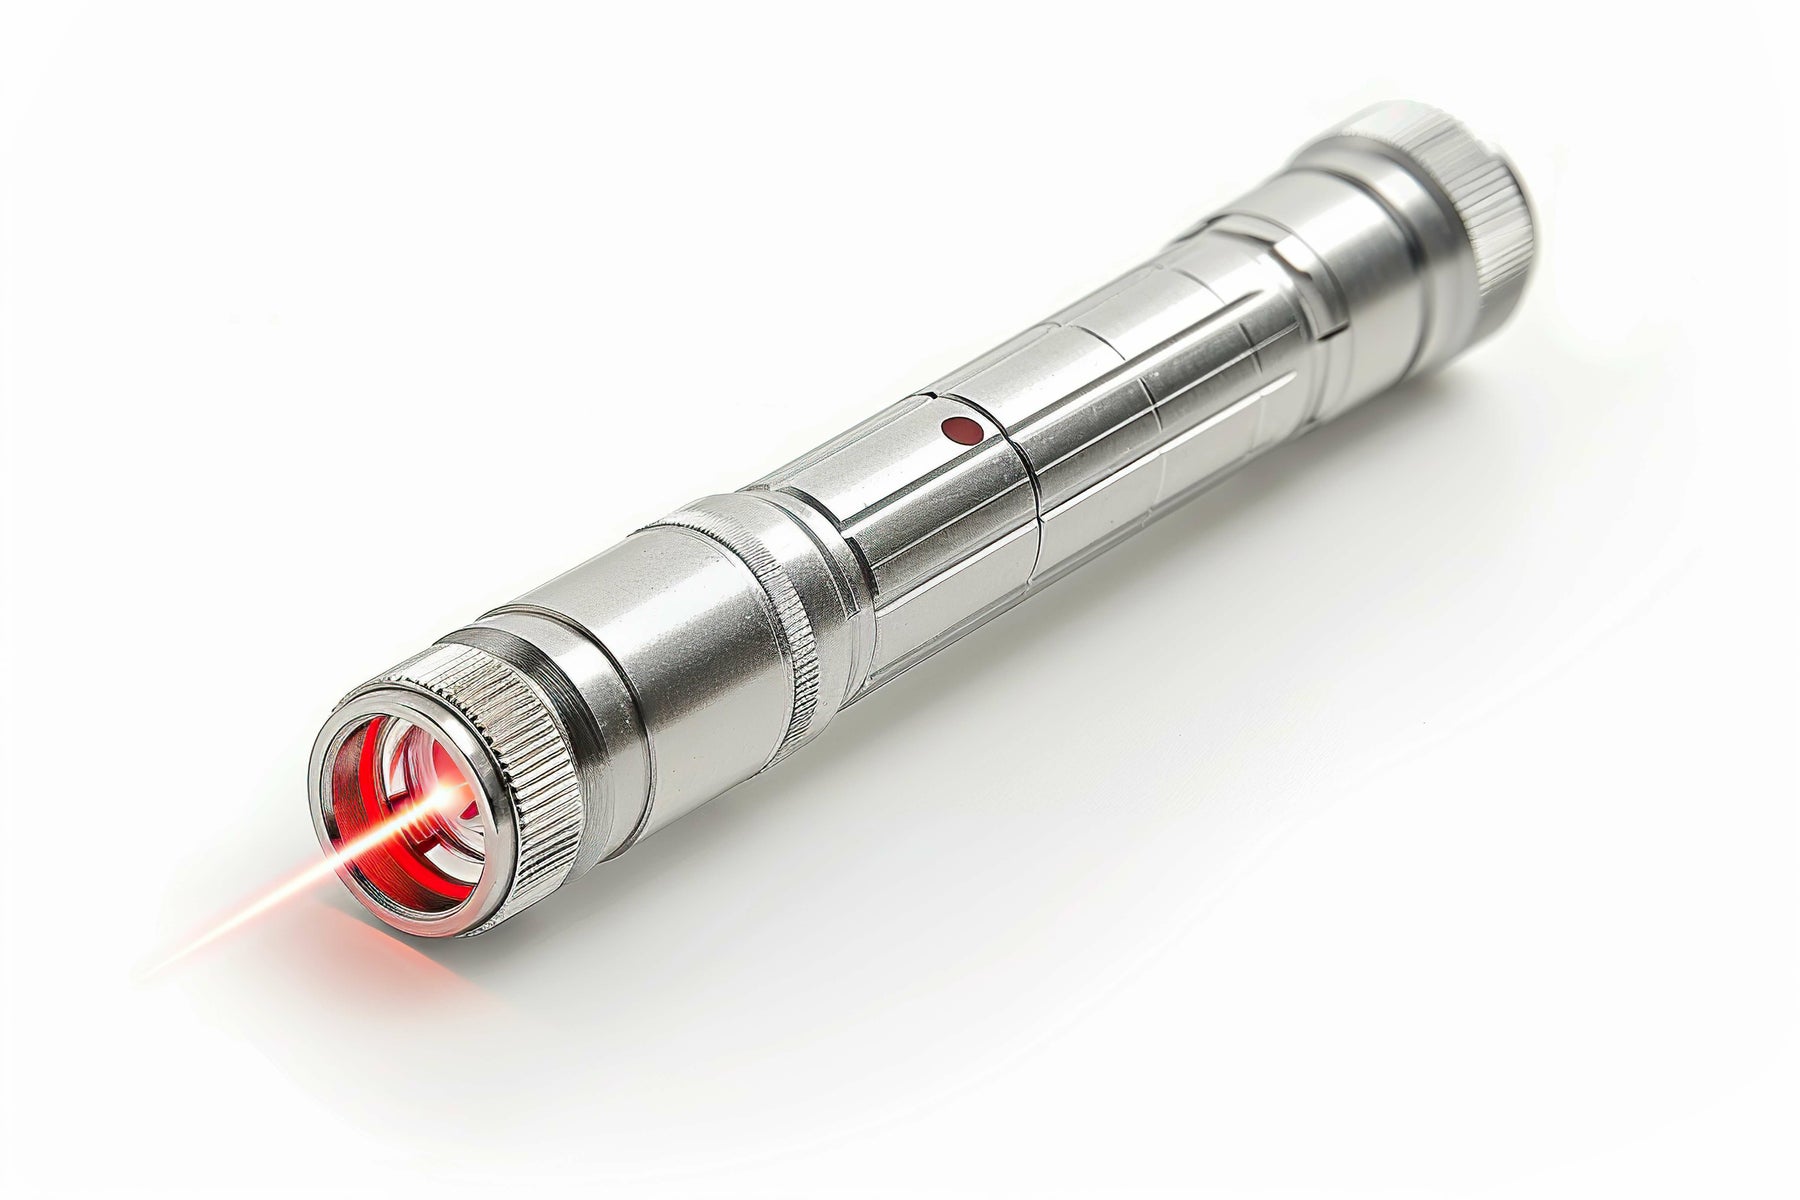 Discover the Power of Laca Laser Pointer: The Ultimate Red Laser Pointers Pen USB